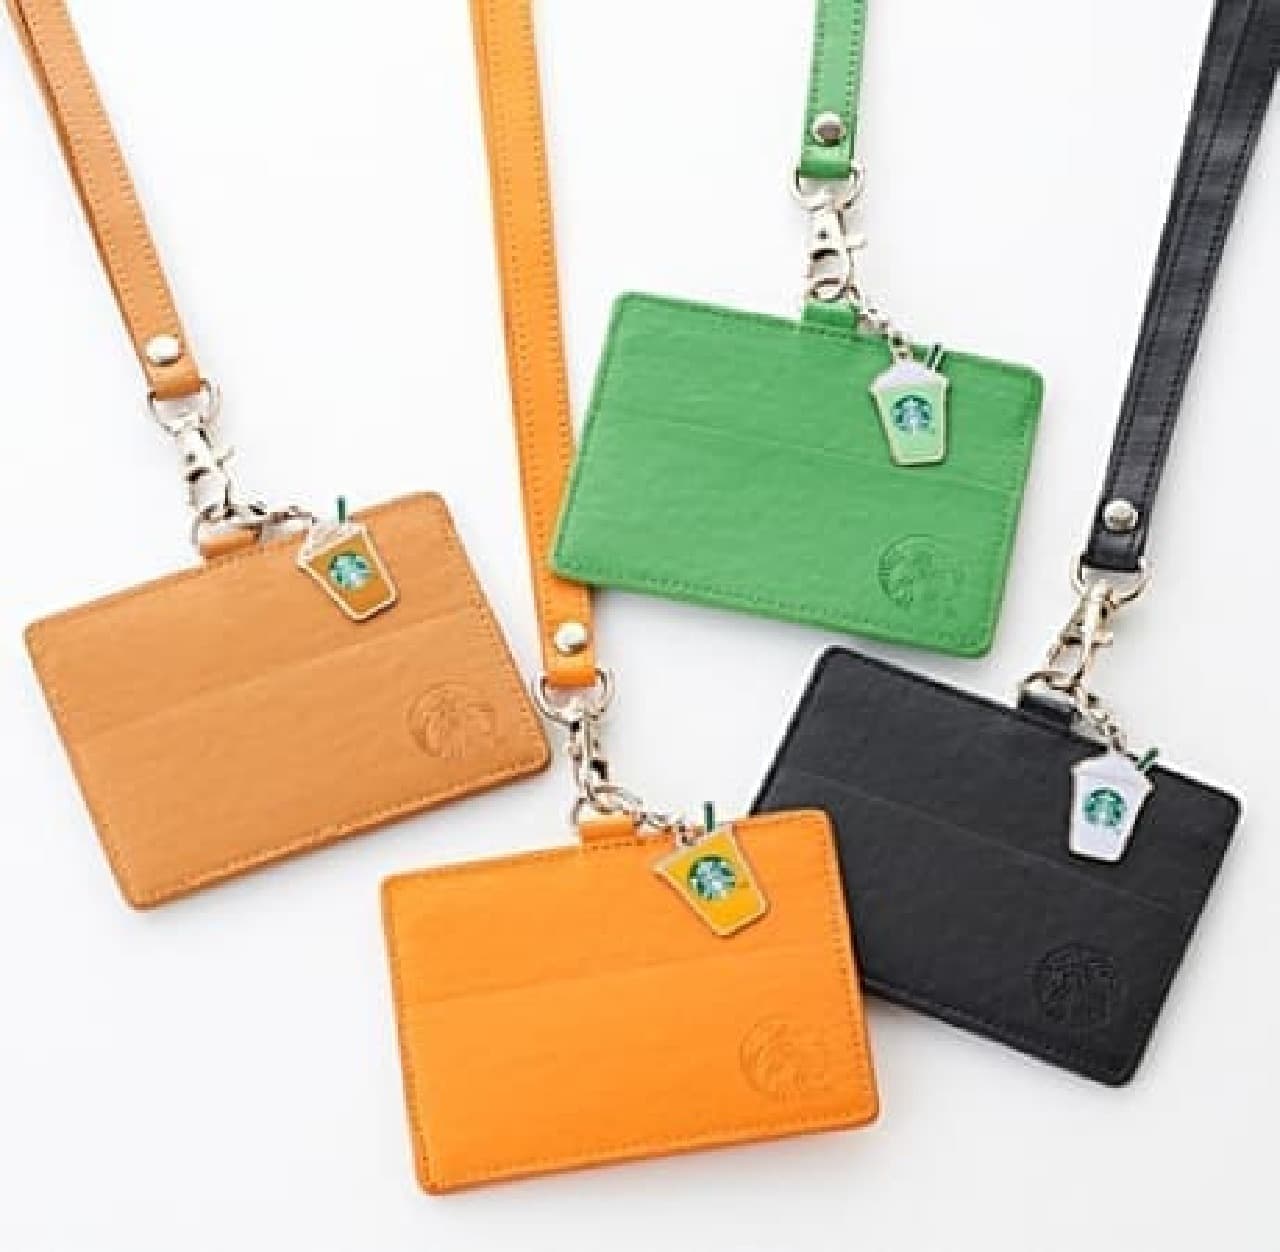 You can get a fashionable leather card case by lottery!